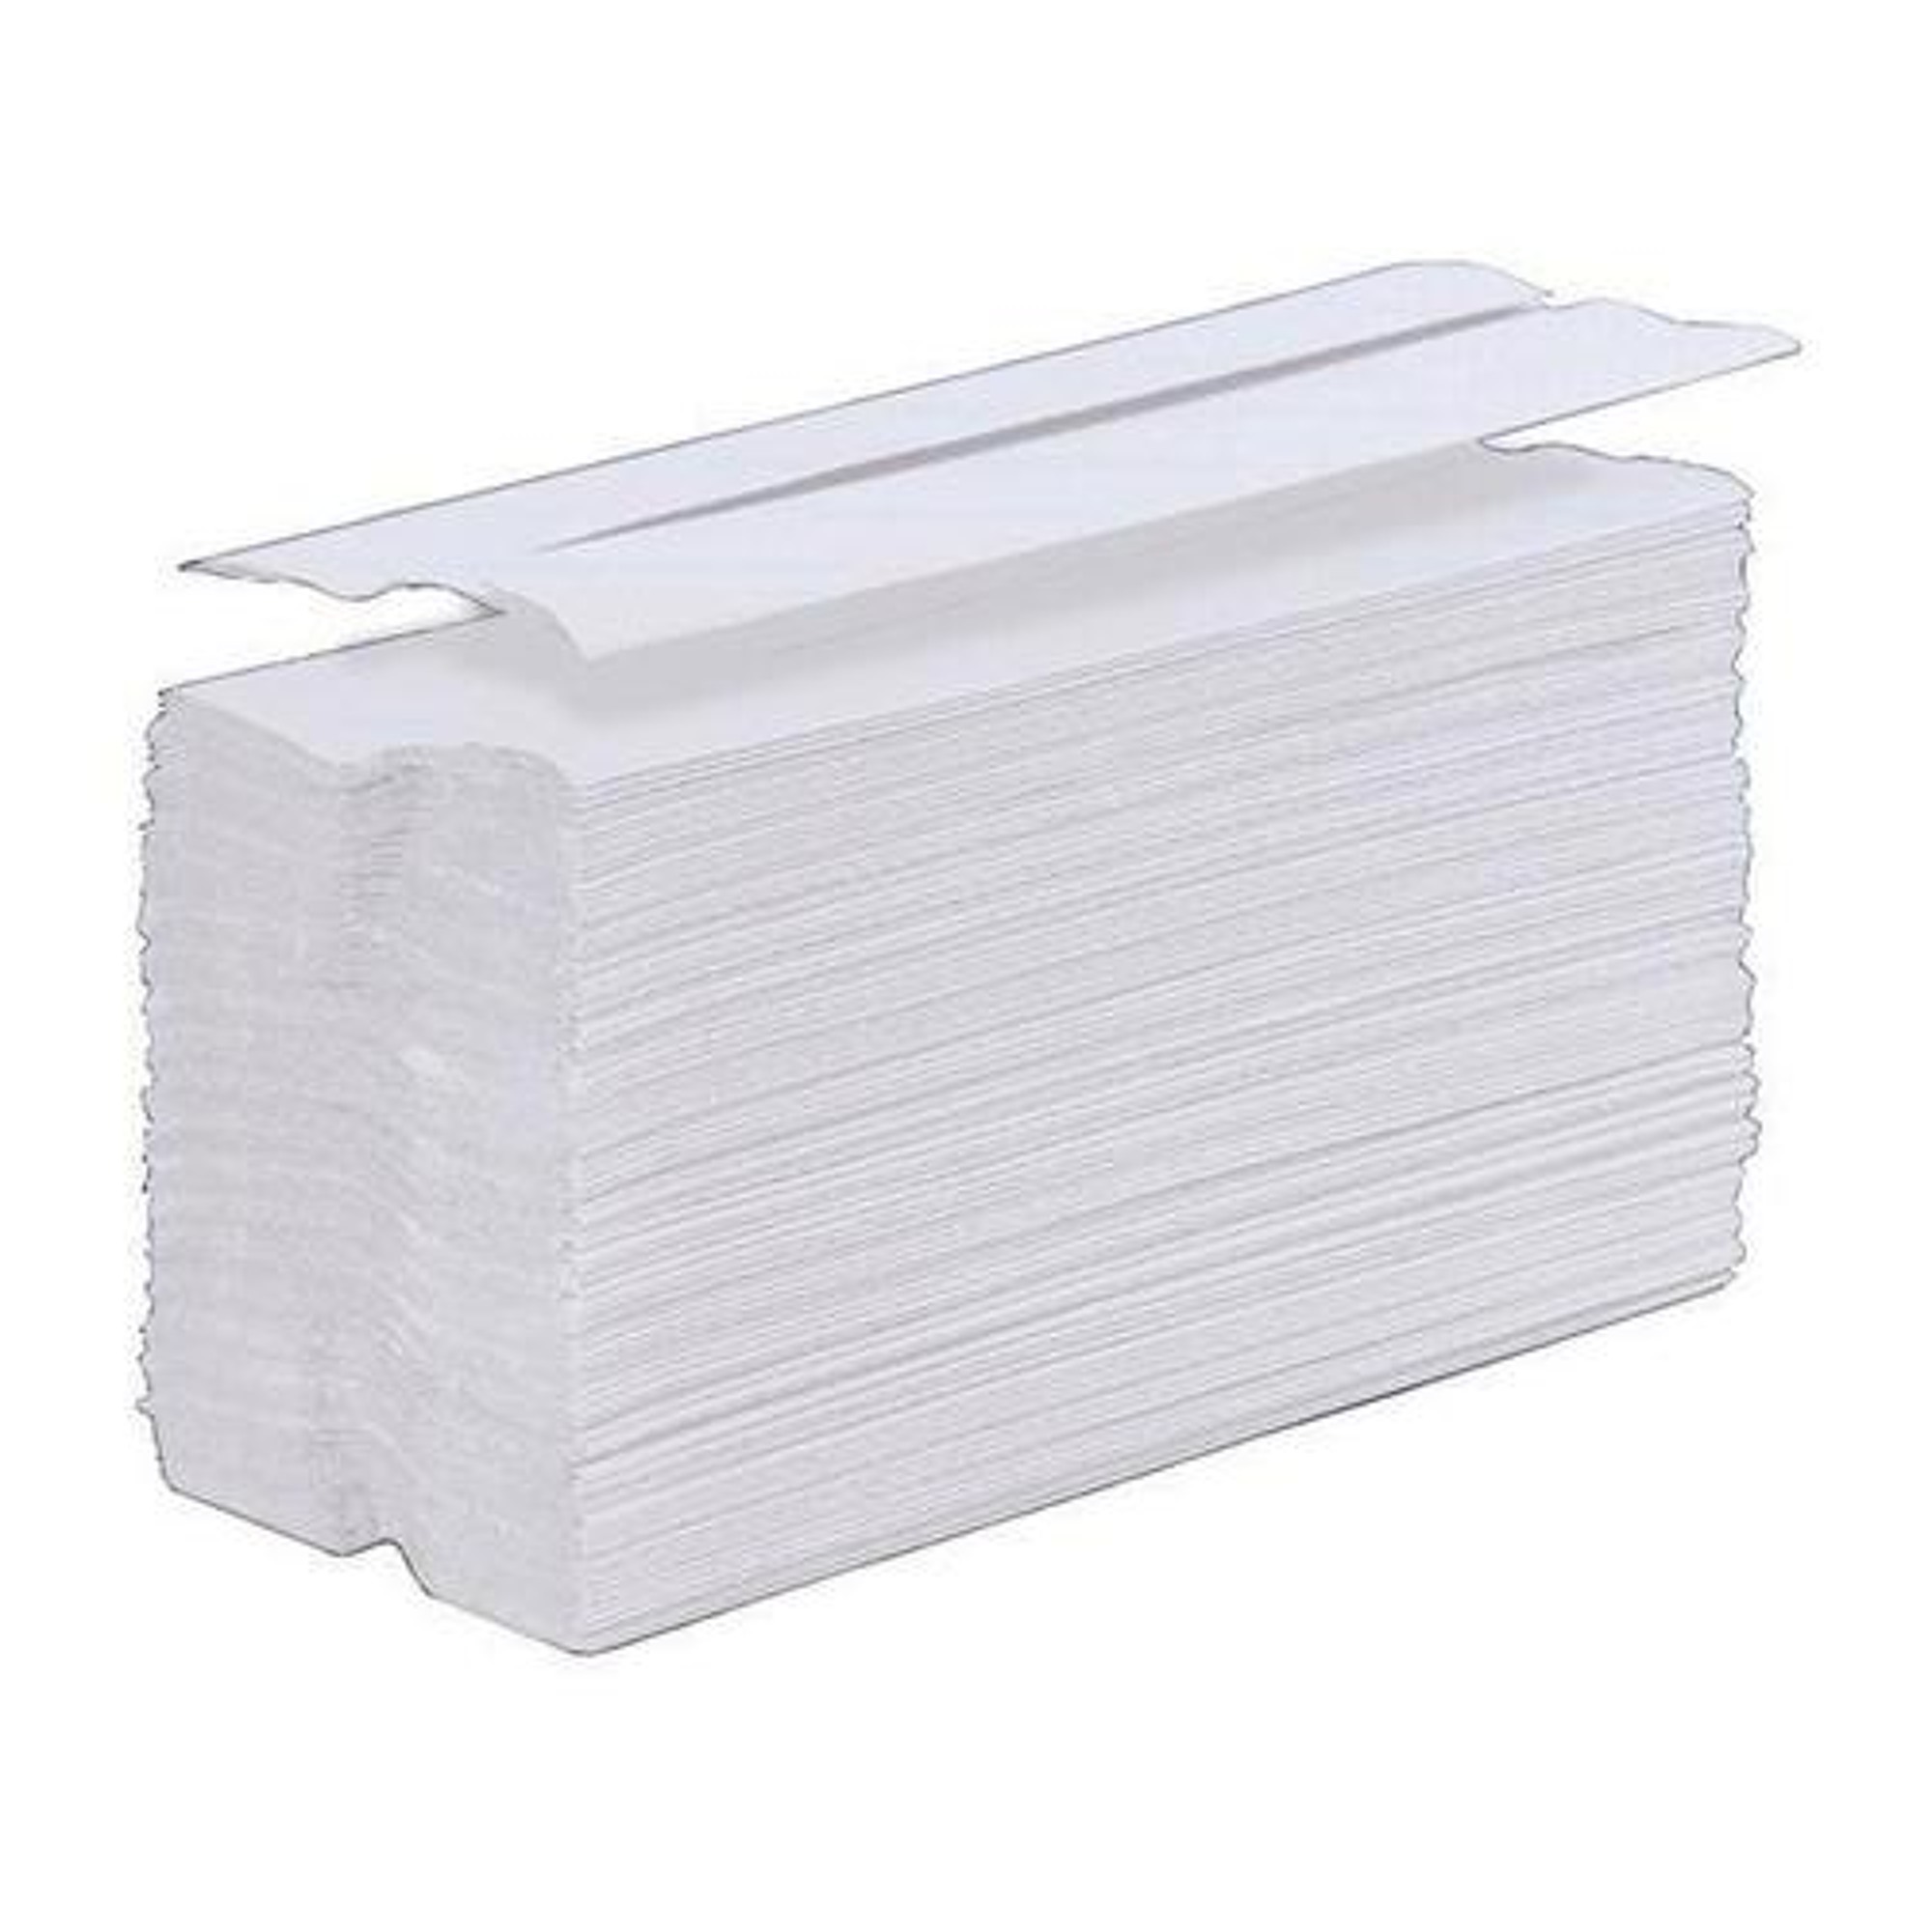 5+Star+Facilities+Hand+Towel+C-Fold+One-Ply+Recycled+Size+230x310mm+100+Towels+Per+Sleeve+White+%5BPack+24%5D